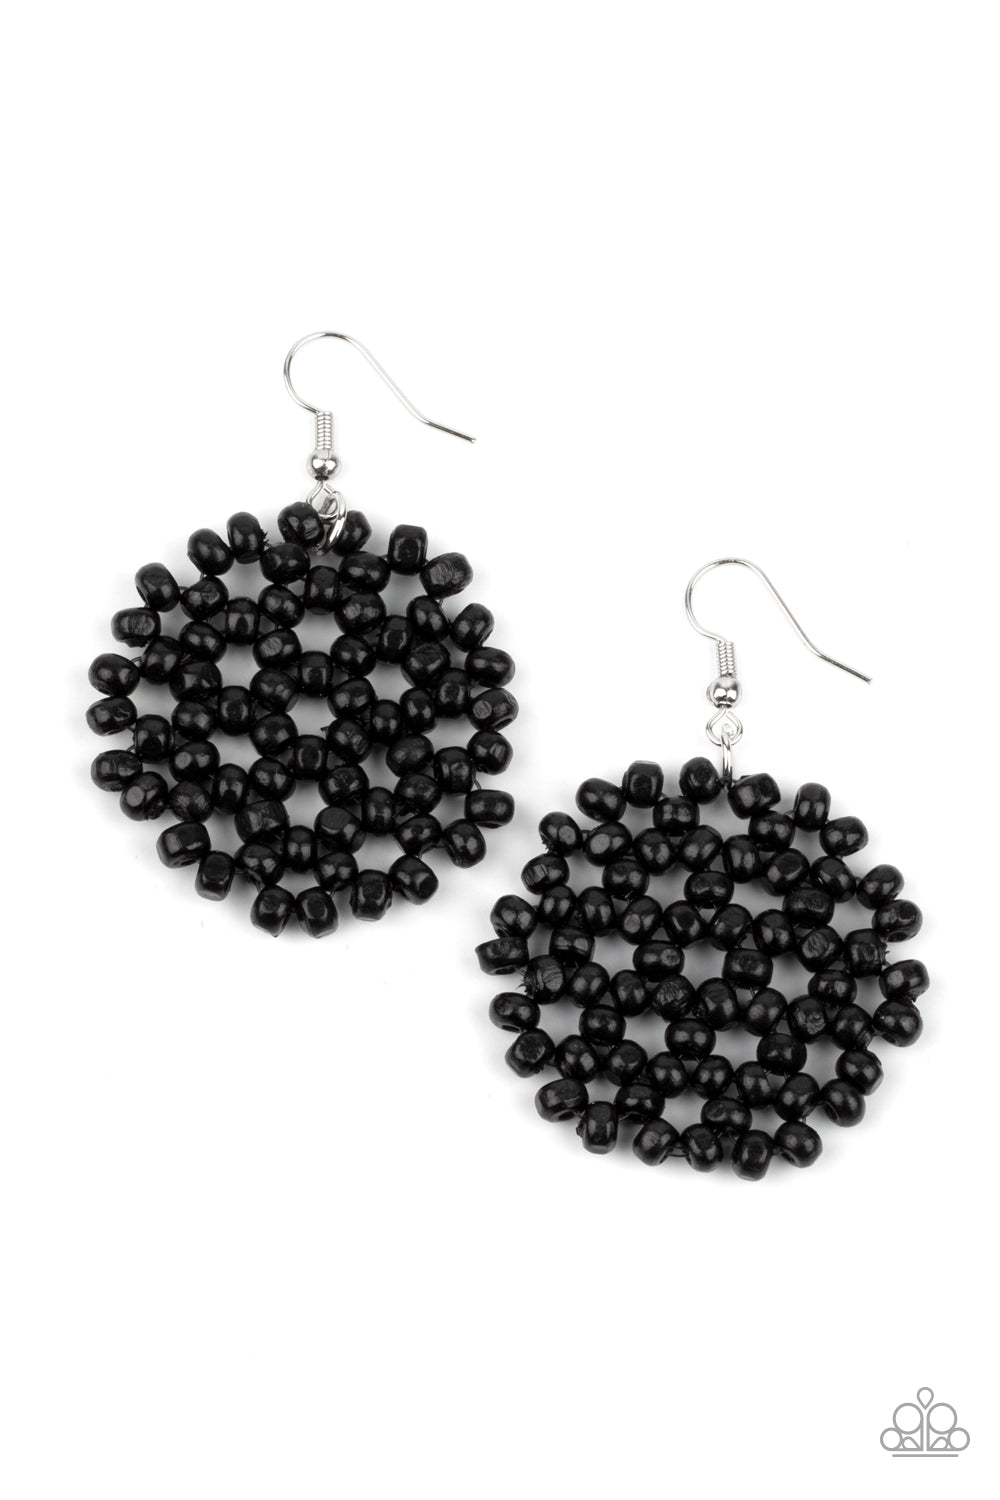 Paparazzi Accessories Summer Escapade - Black Wood Earrings - Lady T Accessories